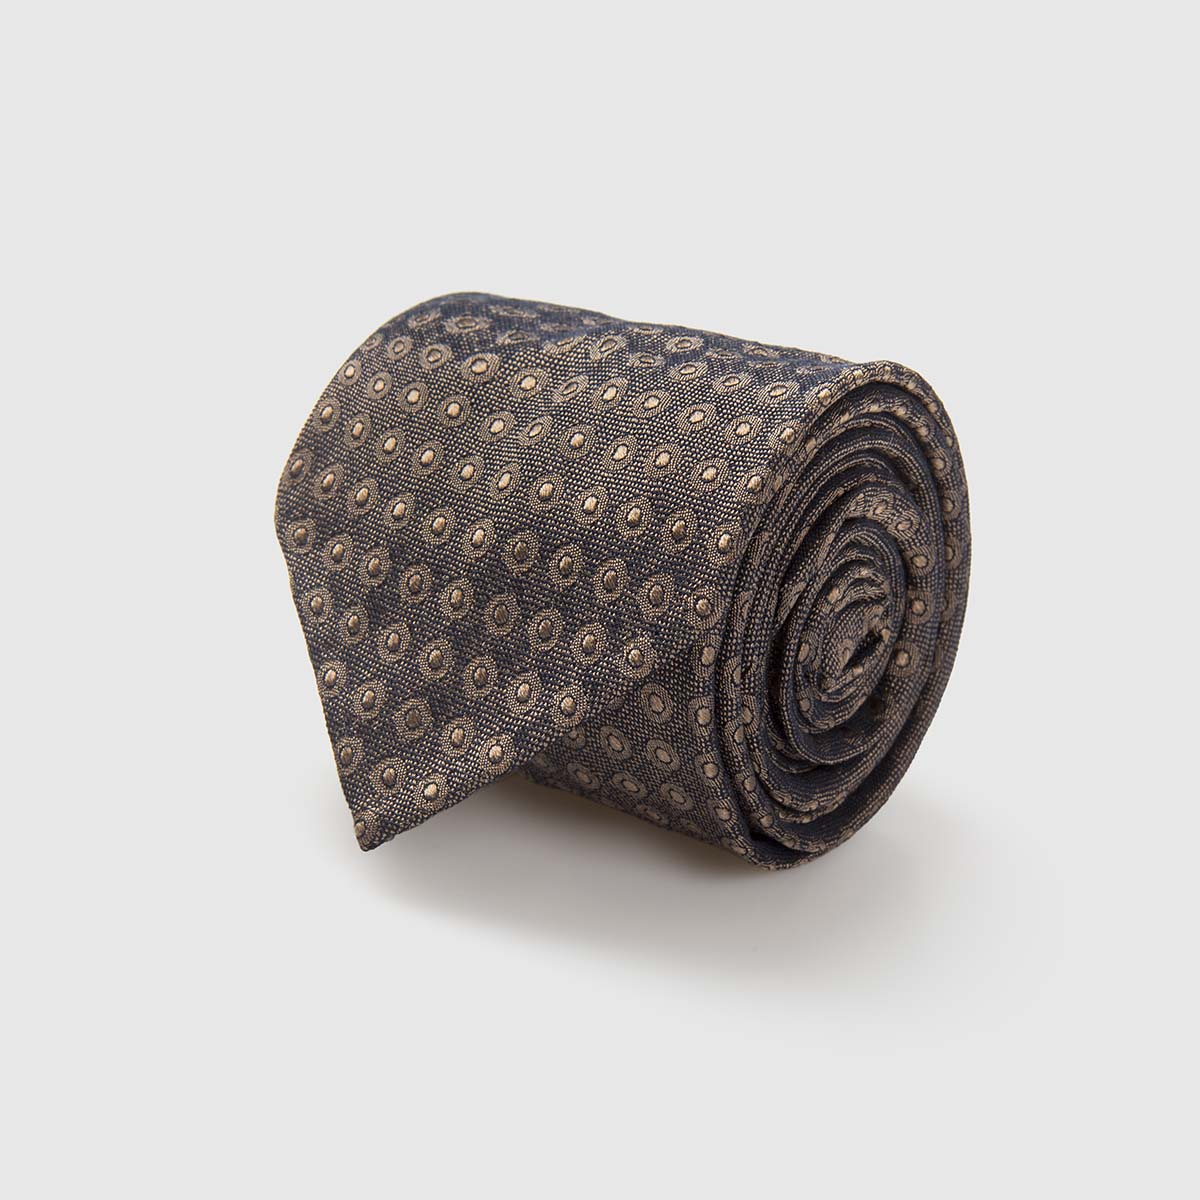 G Inglese Silk Jacquard Tie with brown background